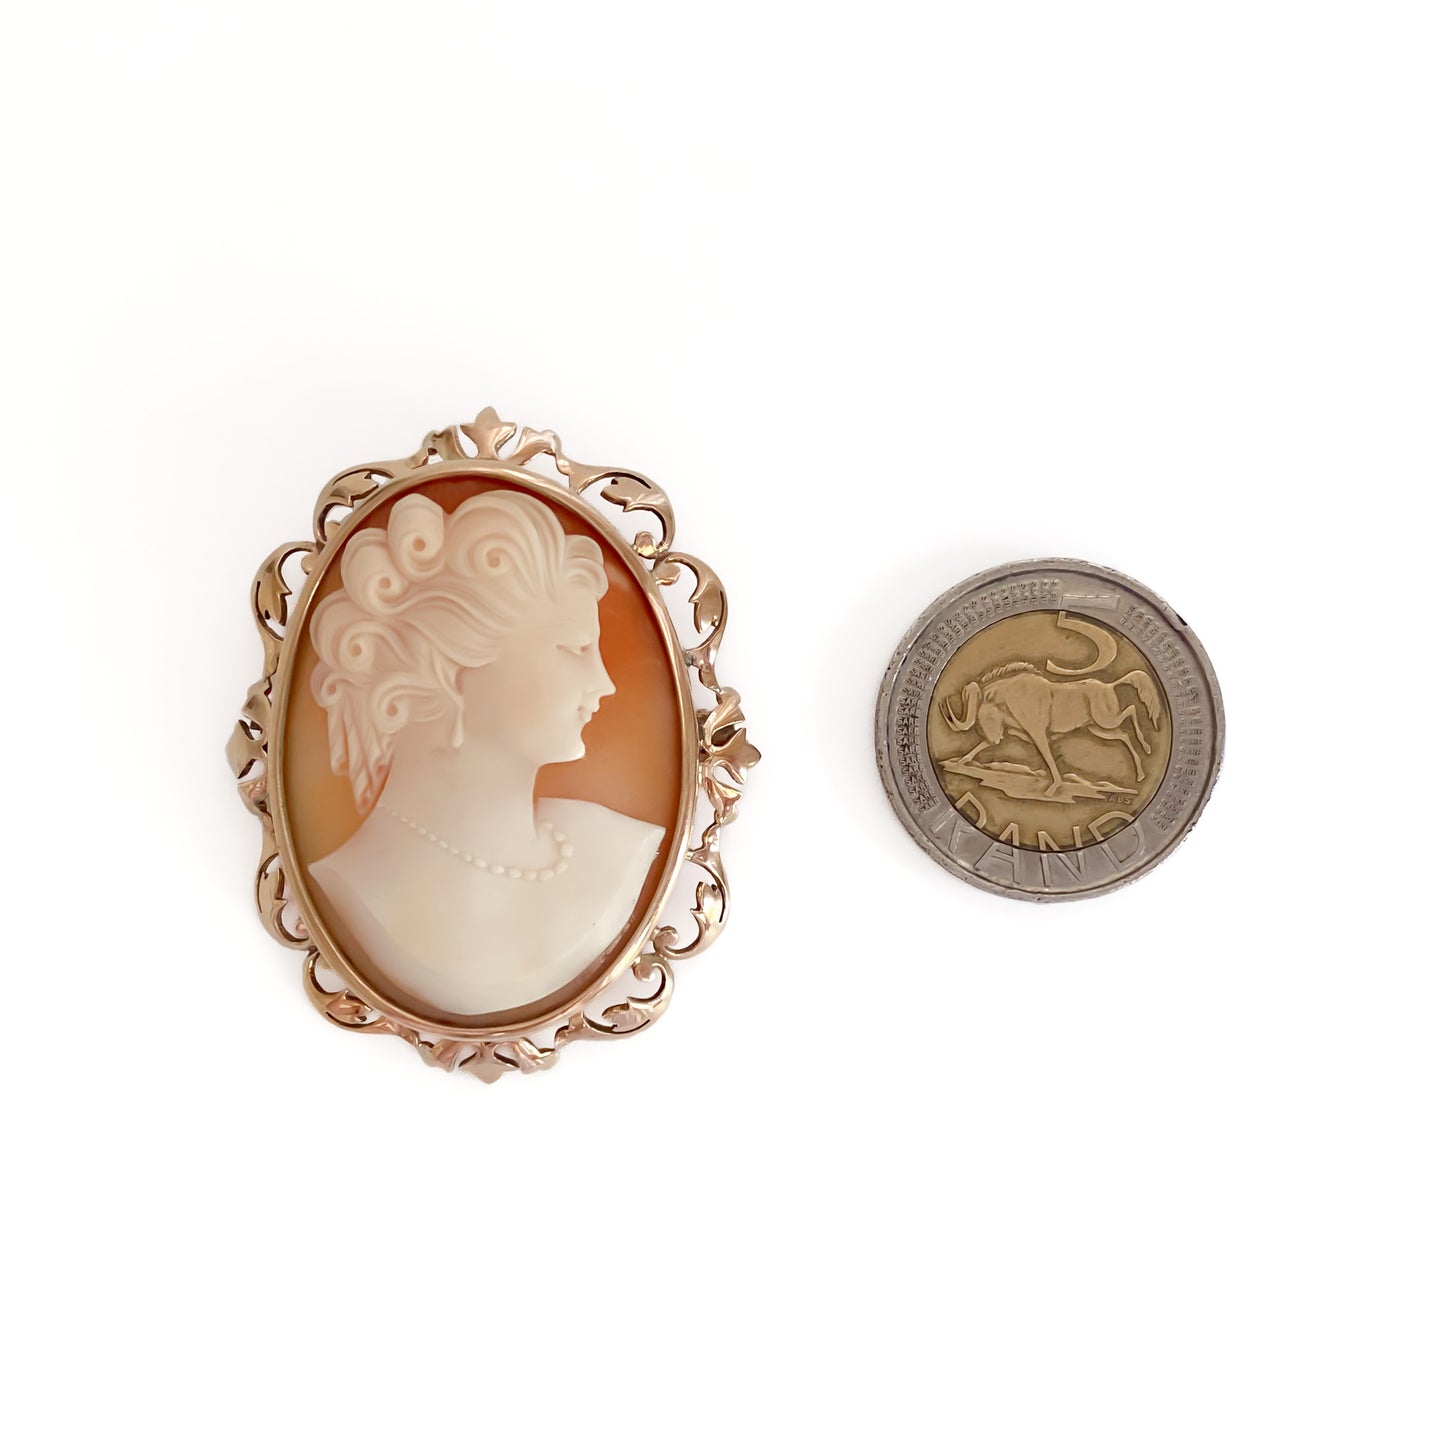 Beautifully carved cameo set in an ornate 9ct rose gold frame. Can be worn as a brooch or a pendant.